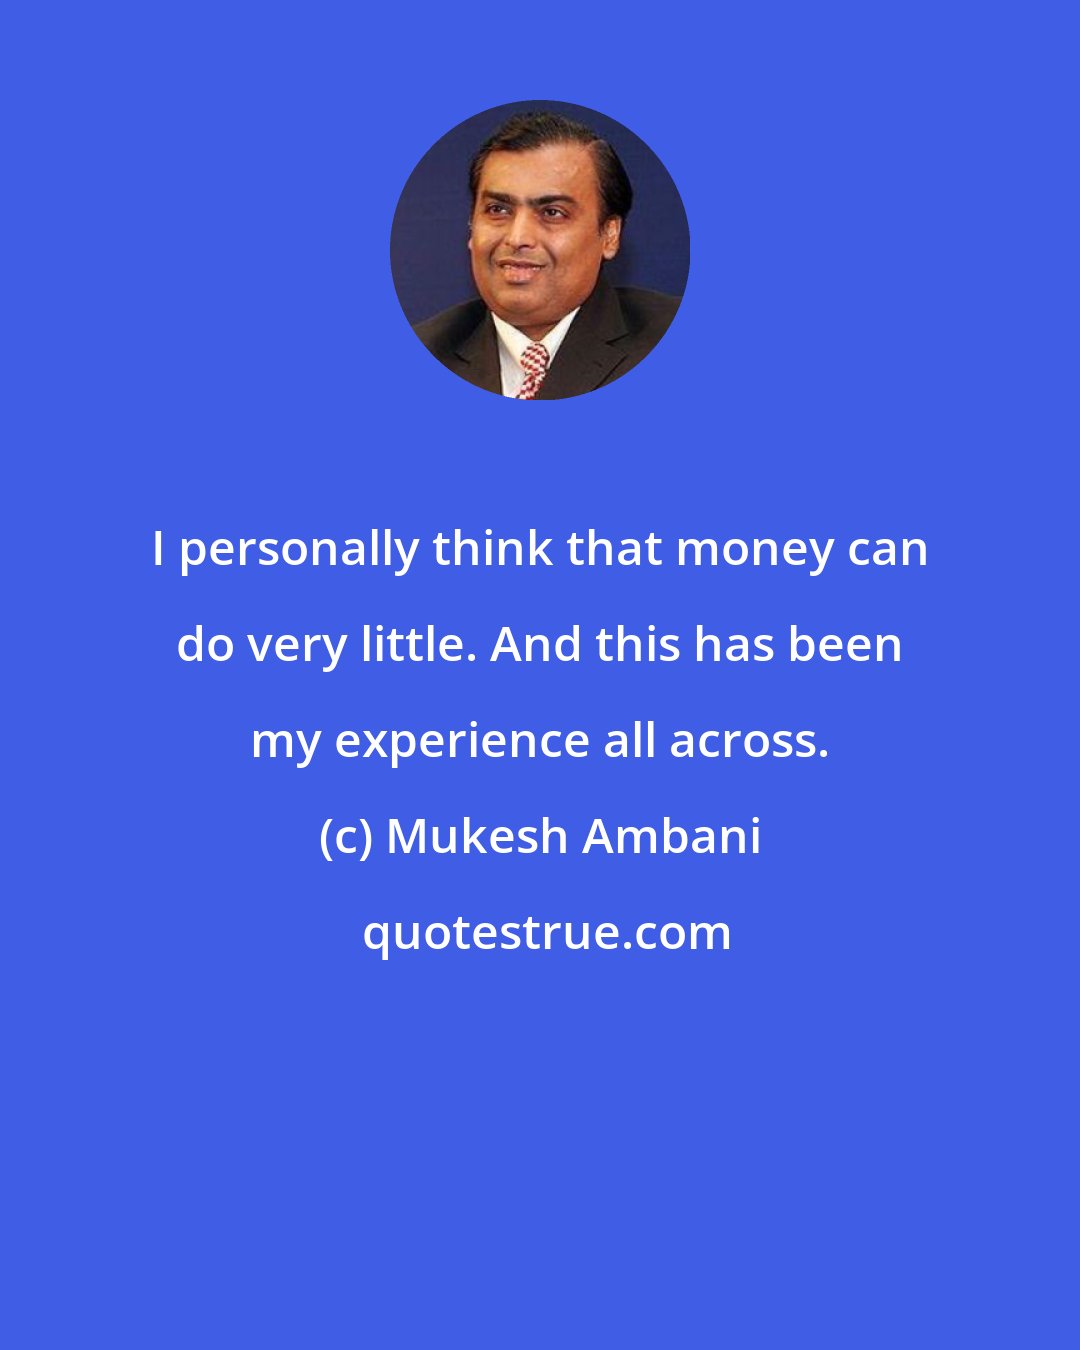 Mukesh Ambani: I personally think that money can do very little. And this has been my experience all across.